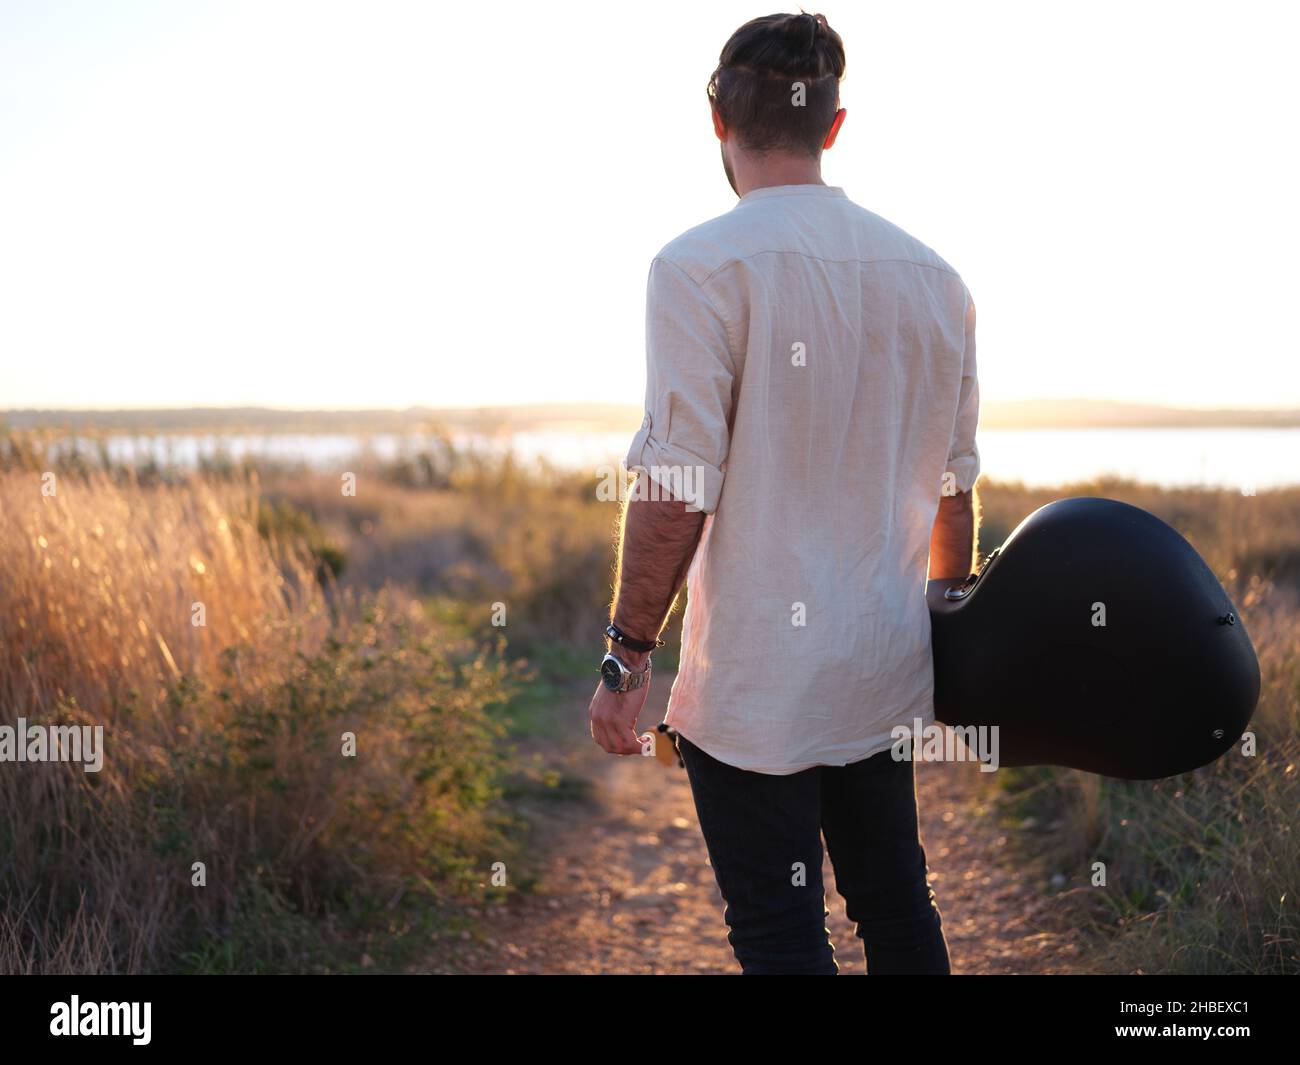 Musician contemplating the sunset with his guitar in his hand Stock Photo